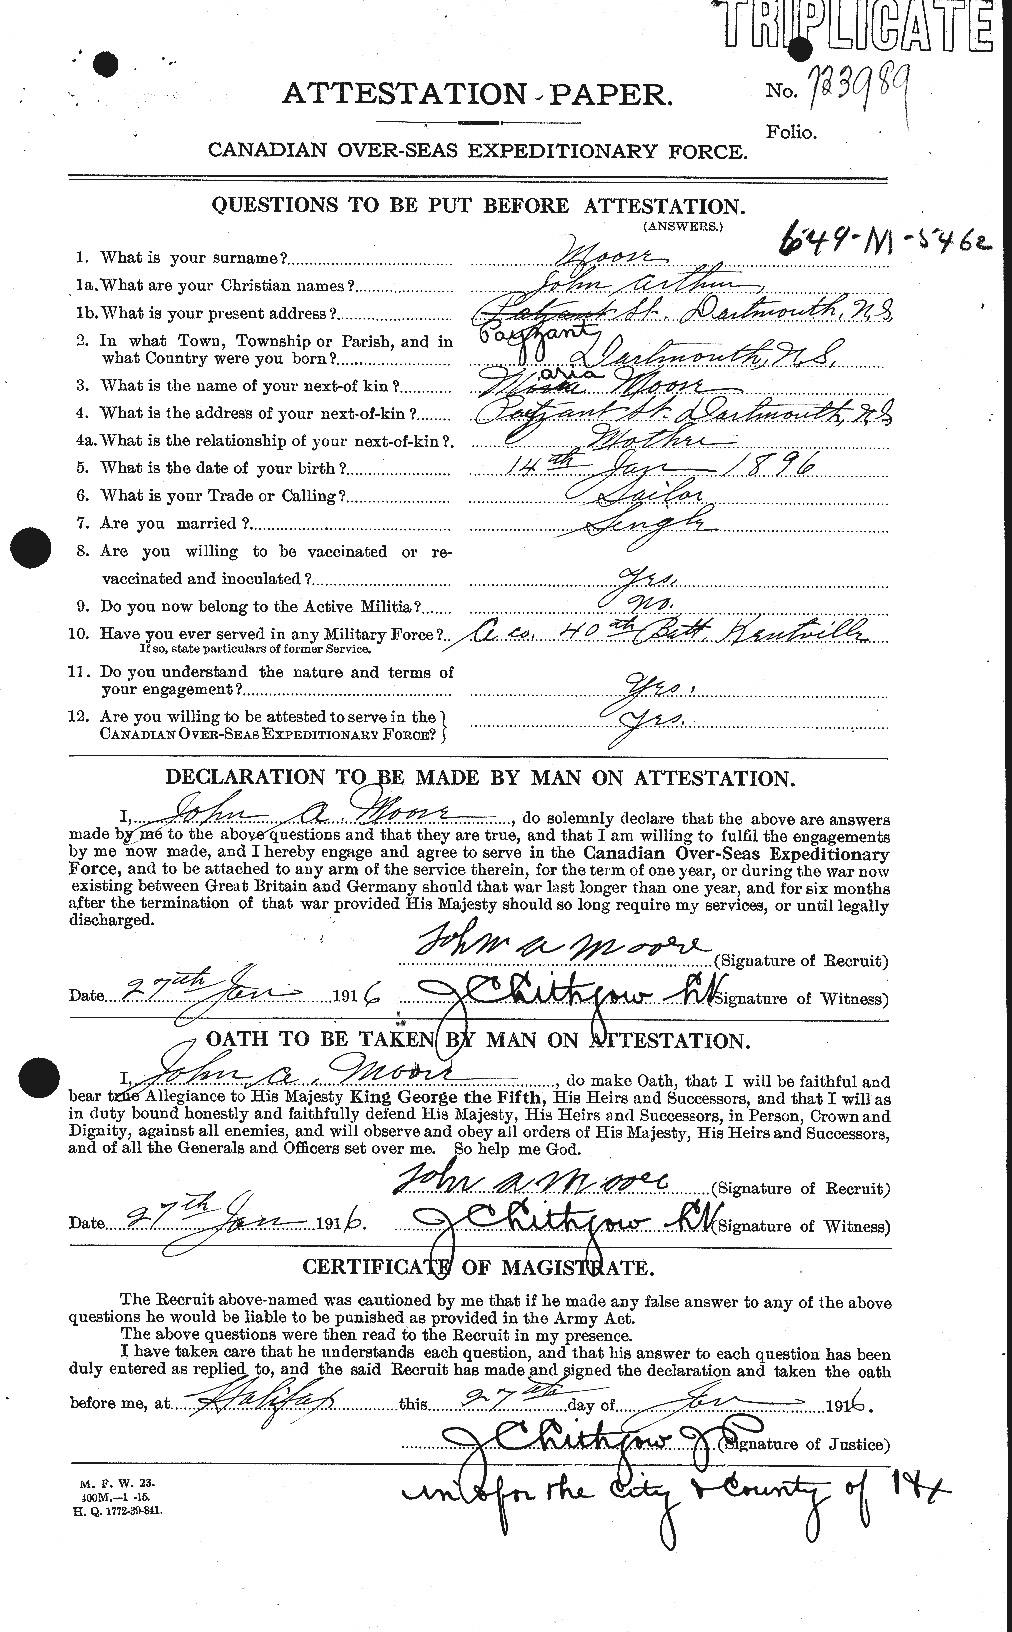 Personnel Records of the First World War - CEF 503259a